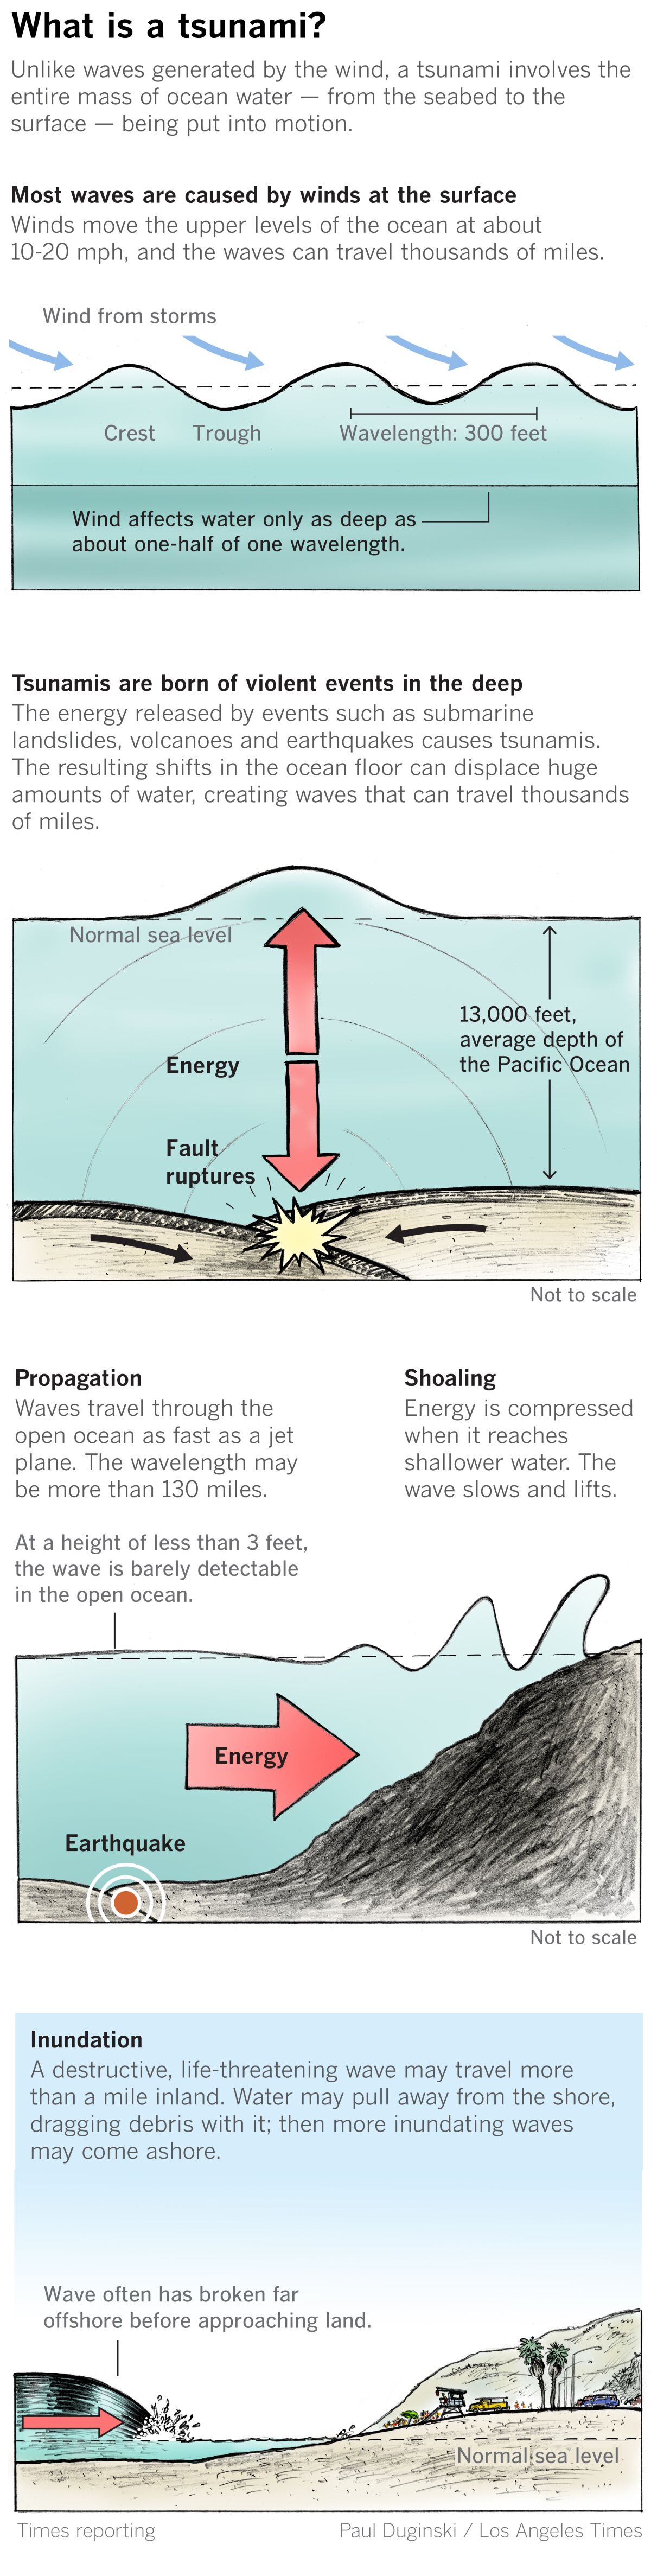 Graphic shows how tsunamis form and the threat they pose to coastlines.